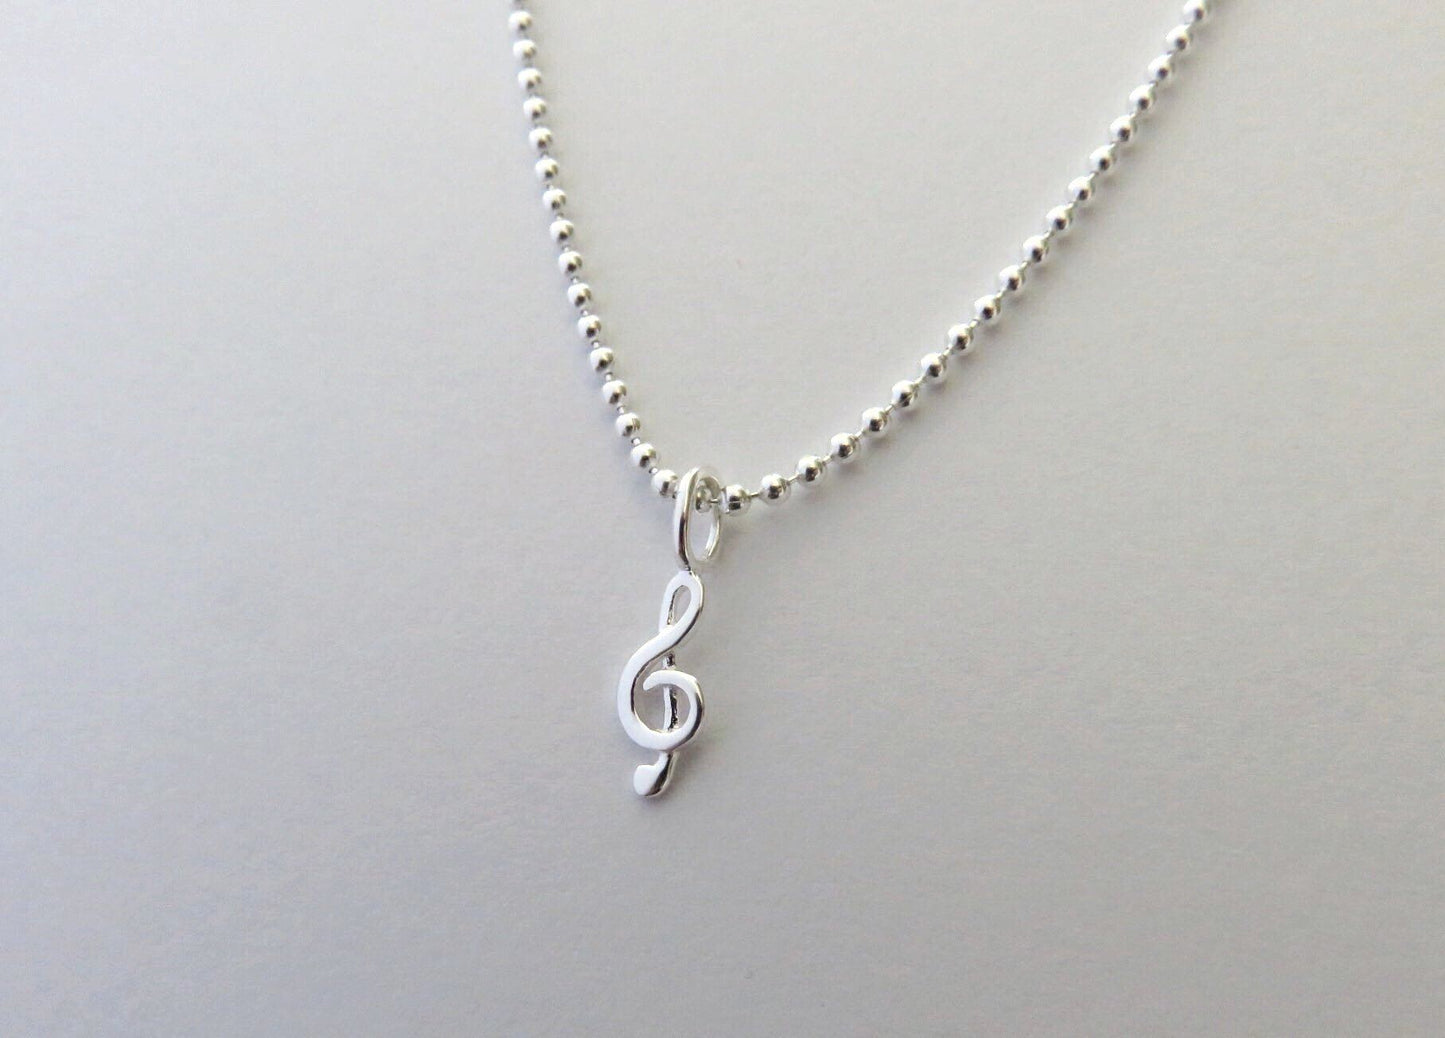 Ball chain with small treble clef made of silver